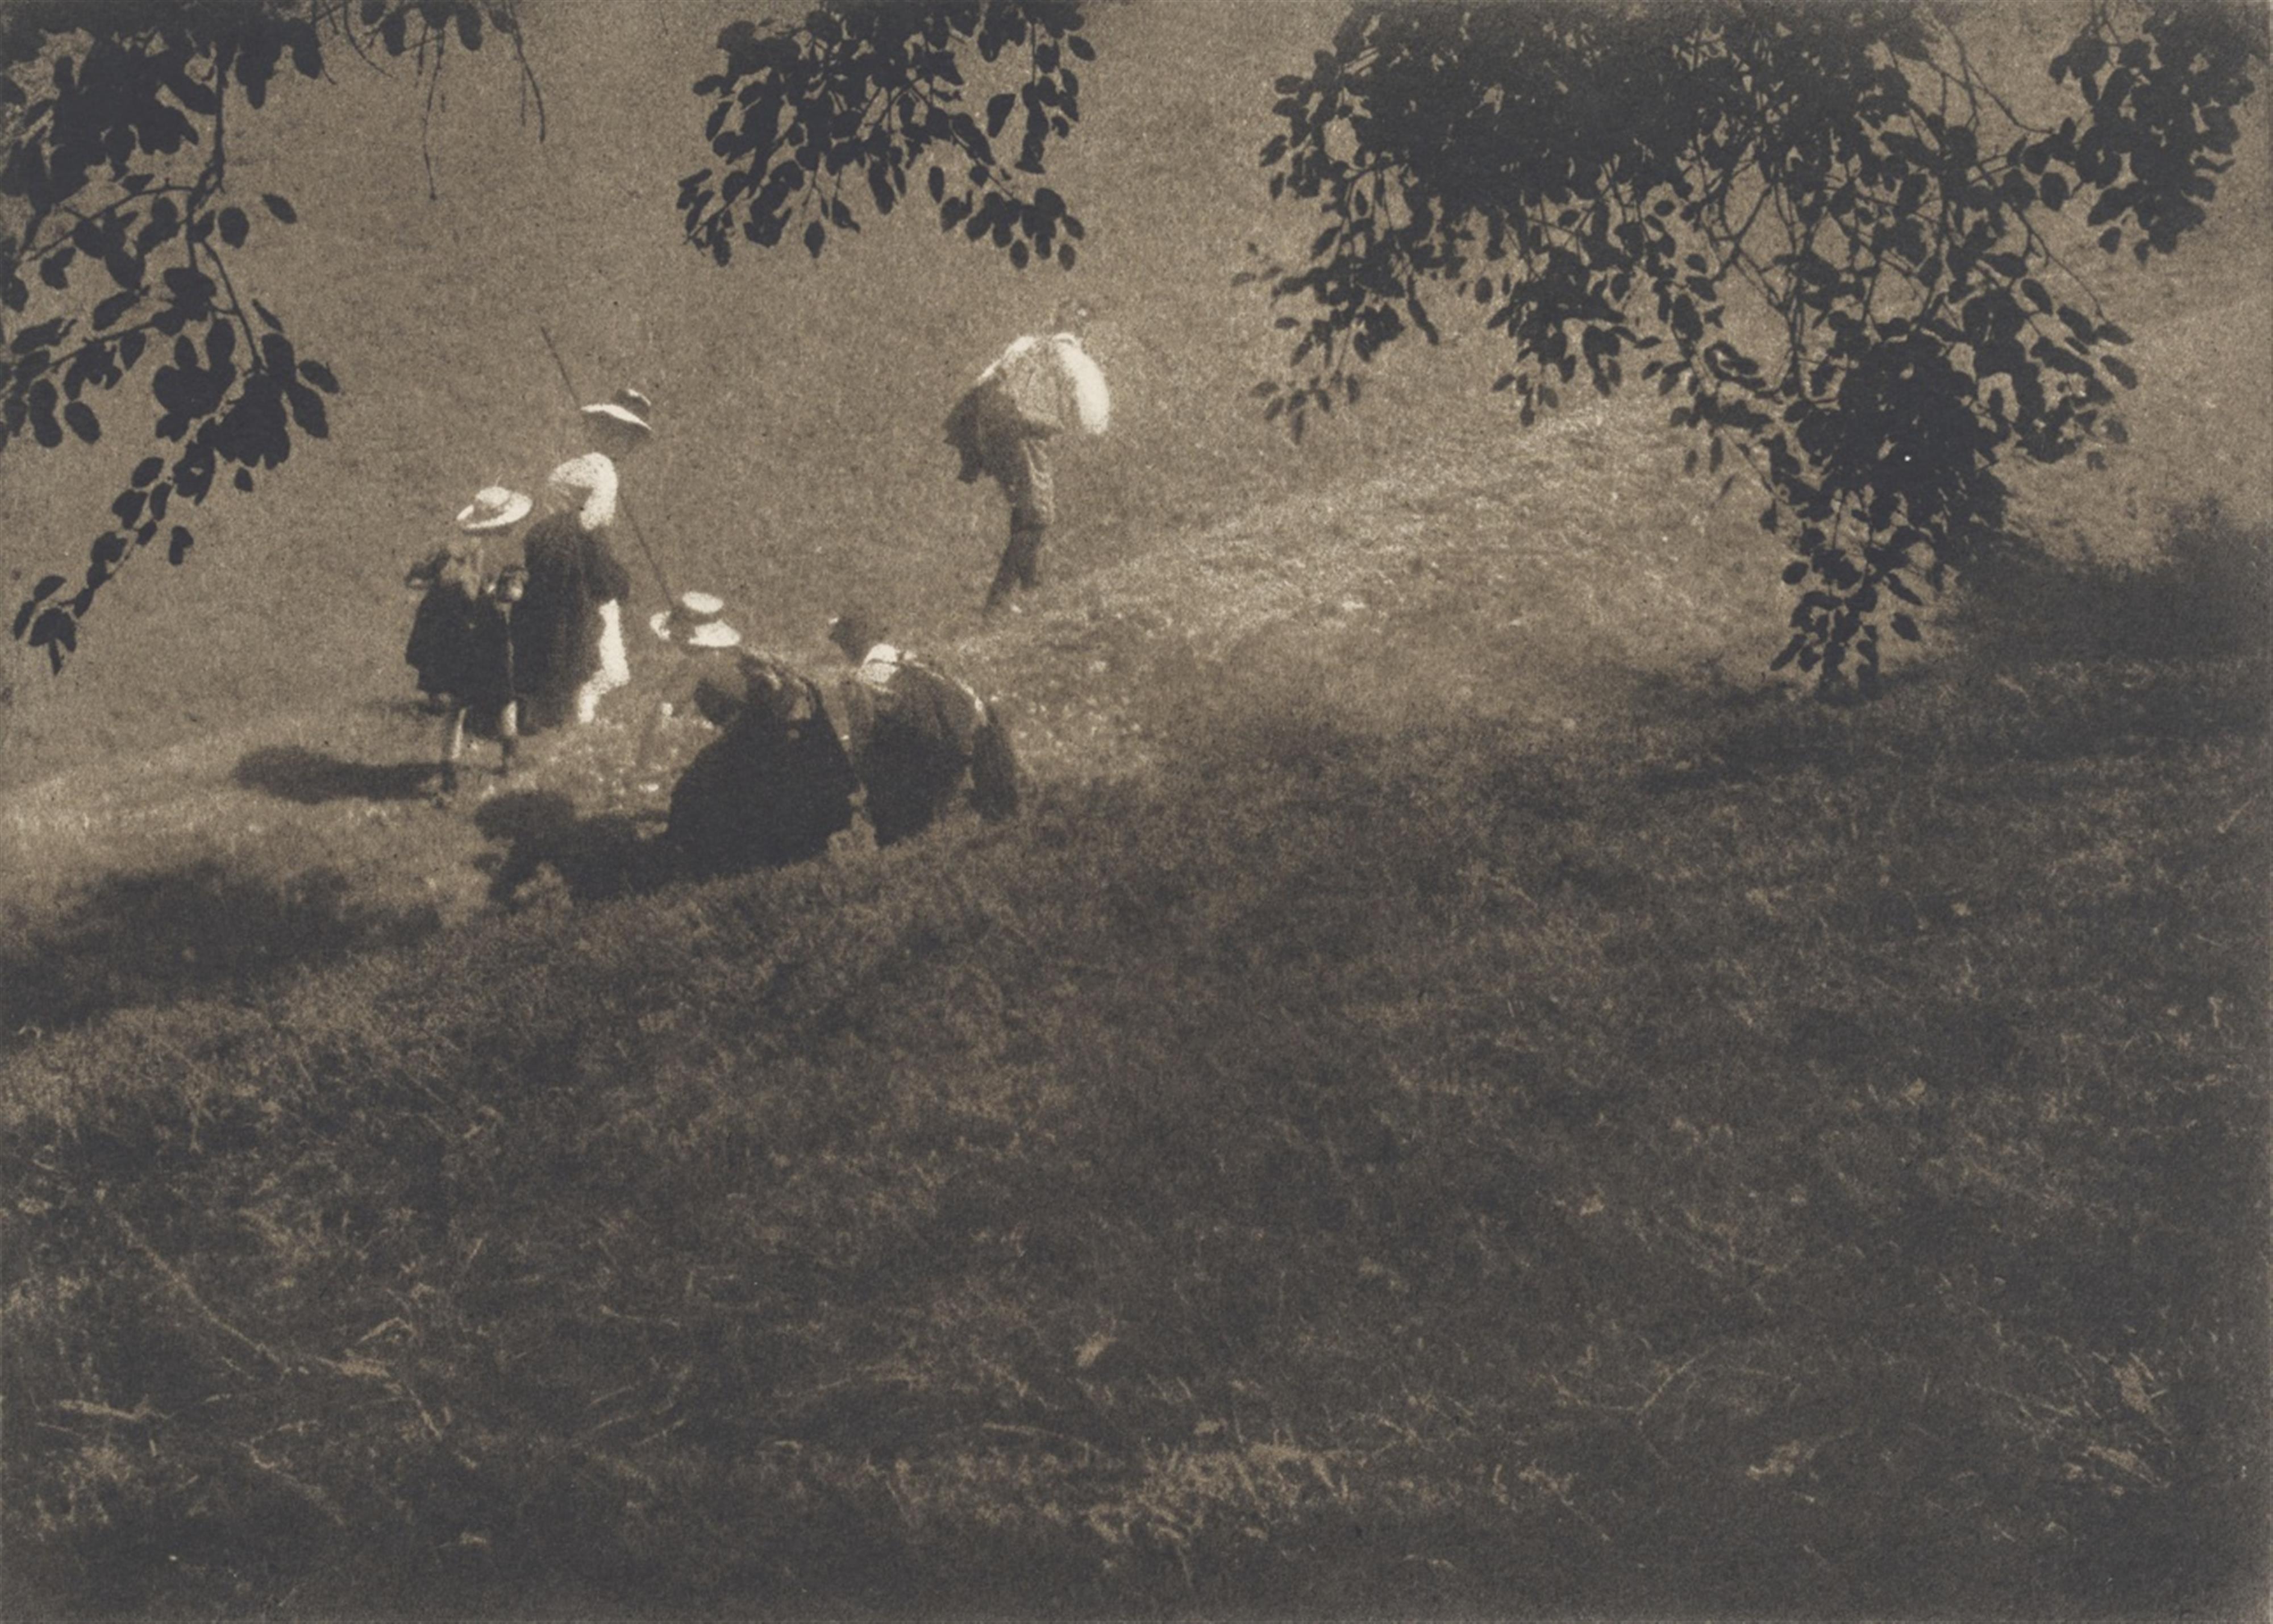 Heinrich Kühn - Hikers on the Edge of the Shadows - image-1